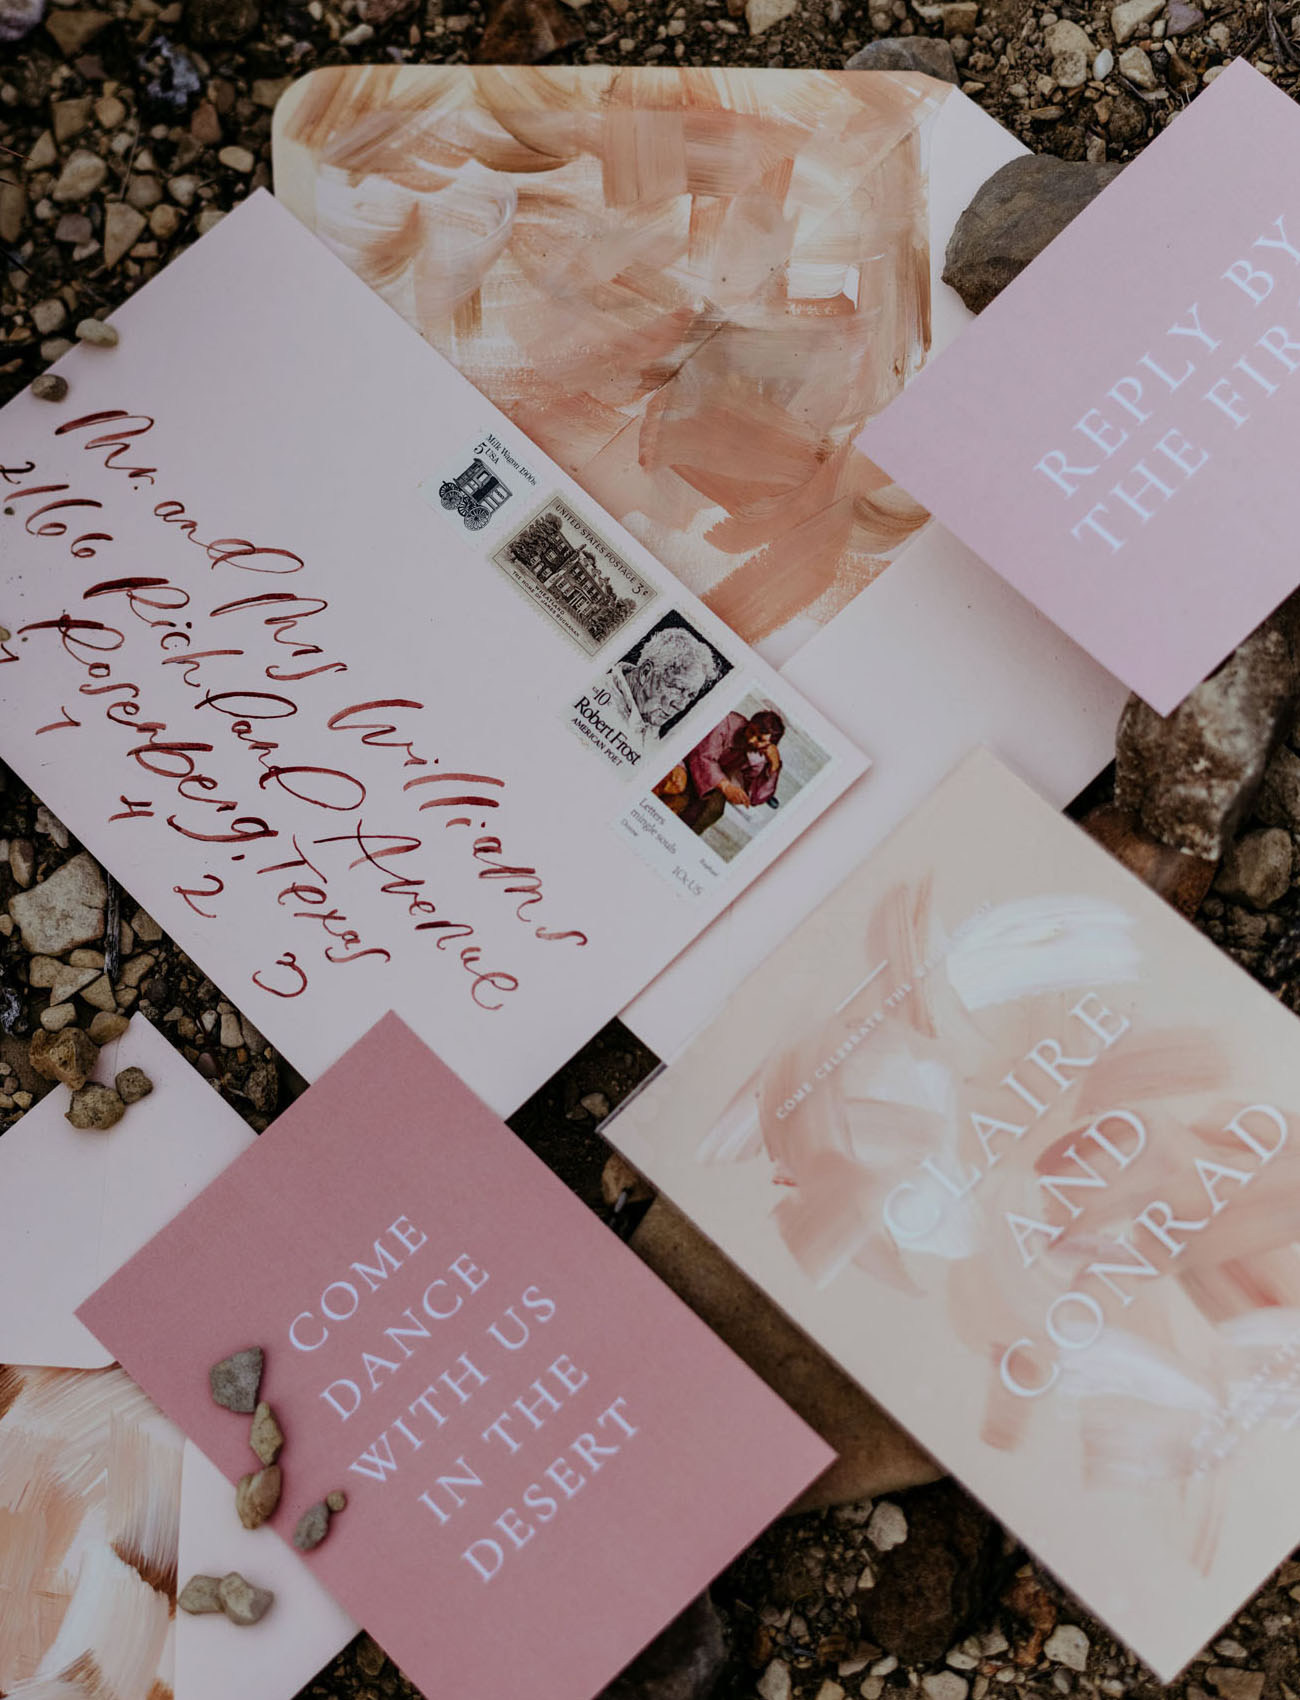 The wedding stationery was brushstroke, with bright and neutral letters